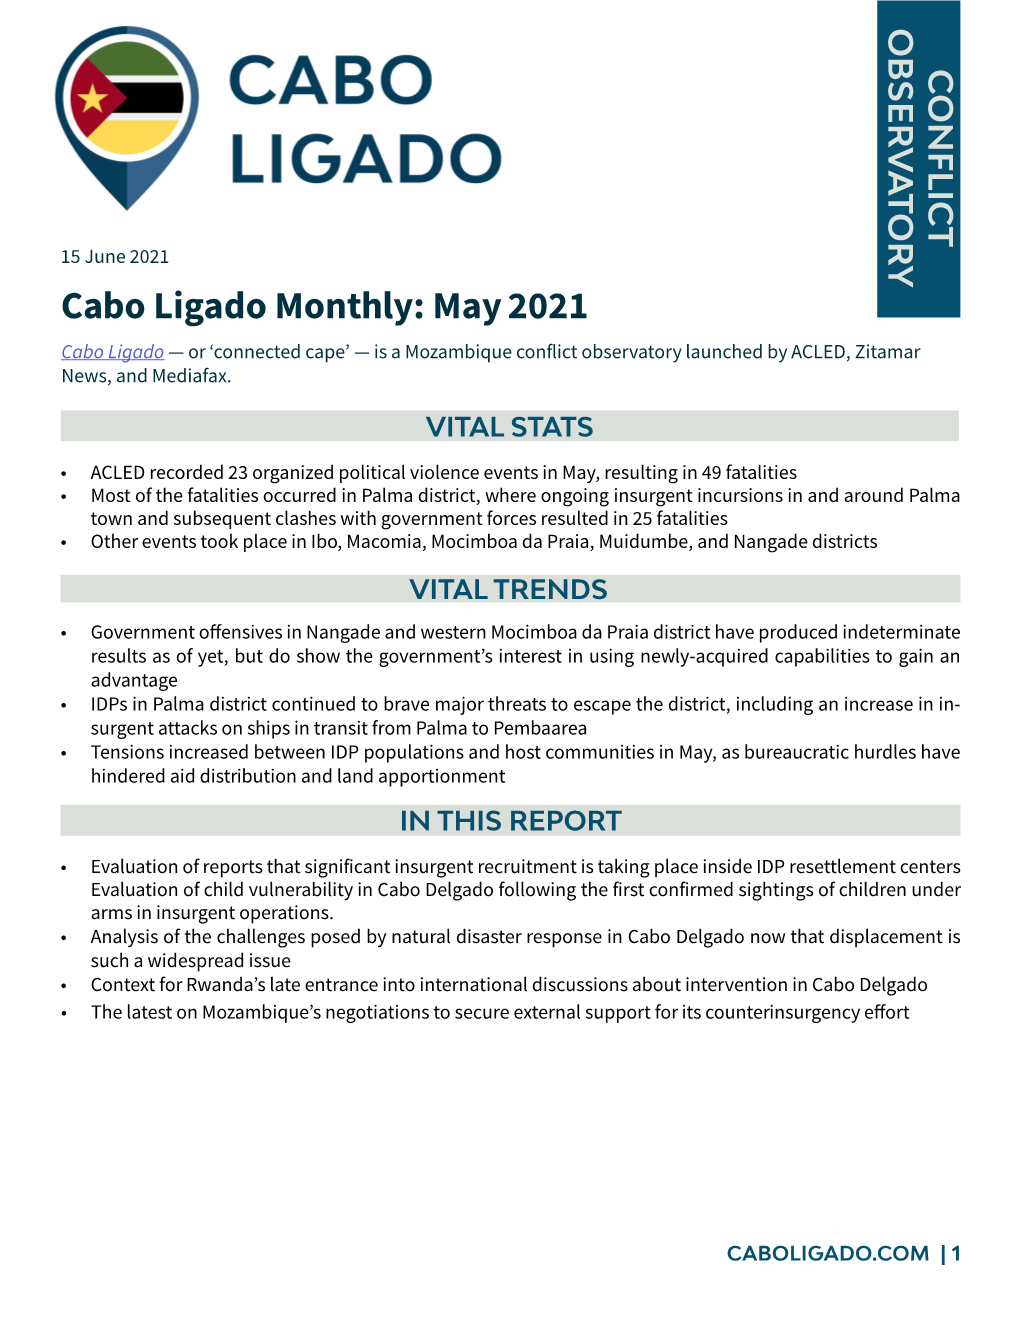 Cabo Ligado Monthly: May 2021